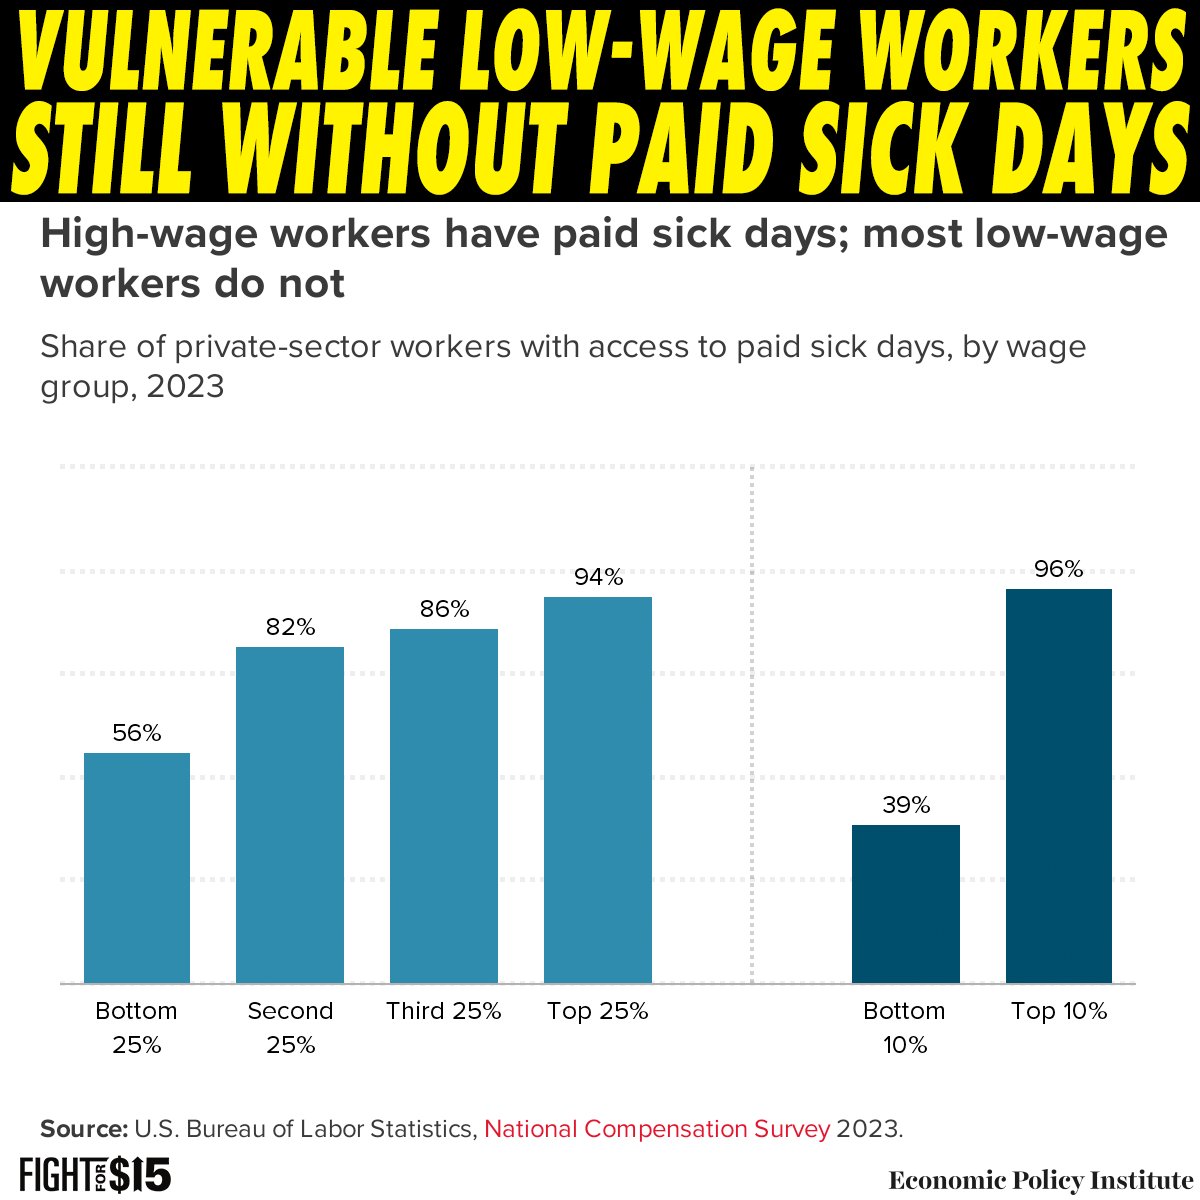 Even after a global pandemic, low-wage workers are still struggling to get paid sick days. We can’t wait for the big corporations we work for to grow a moral backbone, we need to organize and demand what we need. #UnionsForAll bit.ly/3PyOFFM